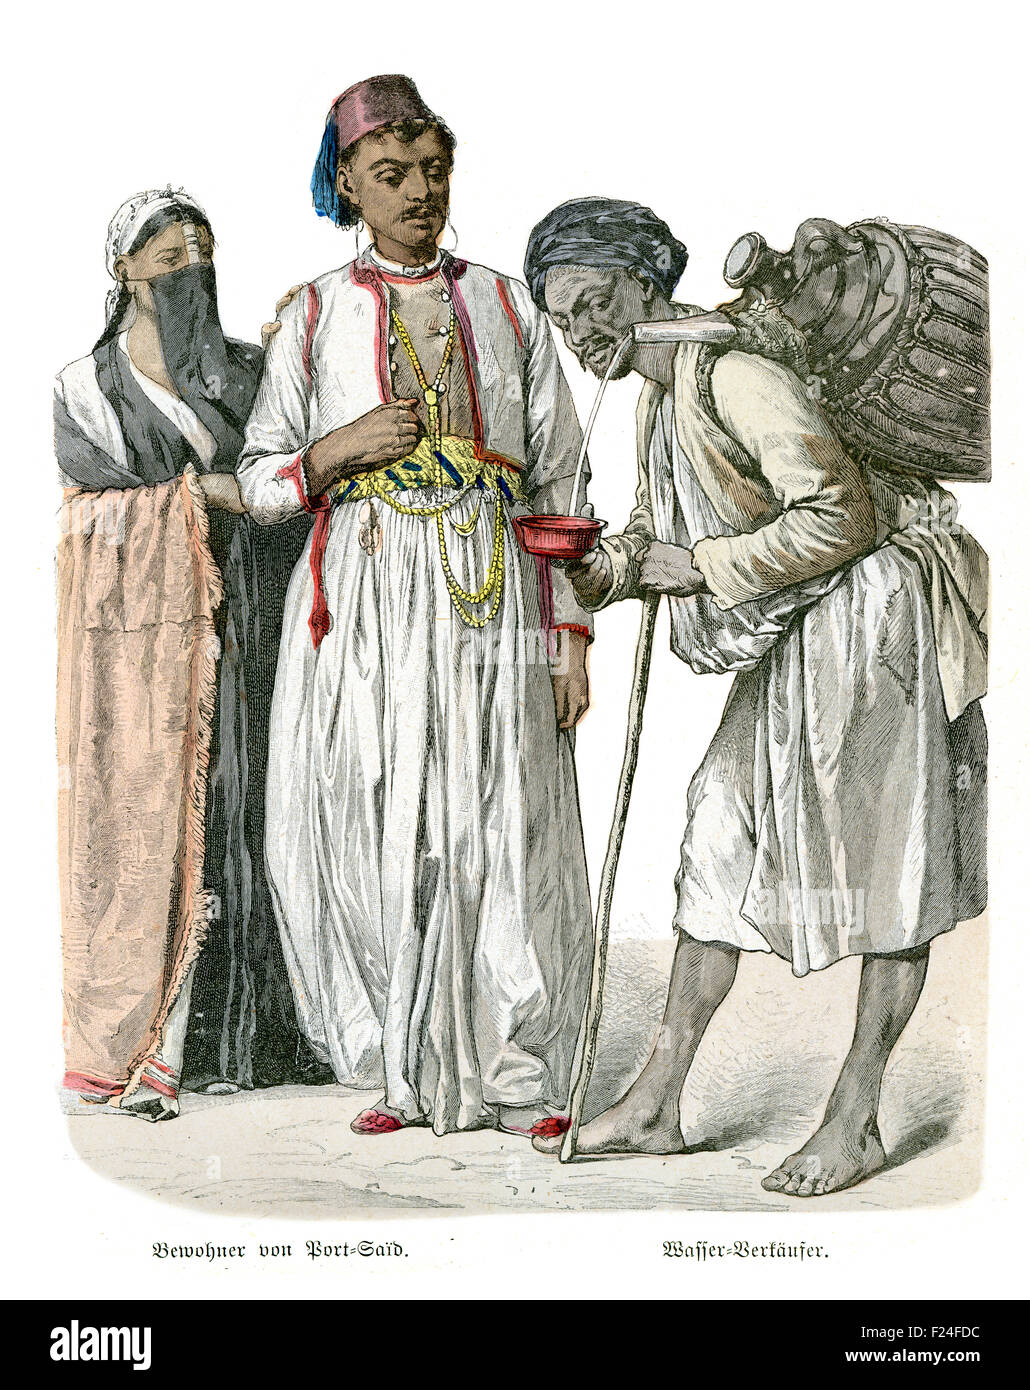 Period costumes of Egypt 19th Century, Man and woman of Port Said and a Water Seller Stock Photo